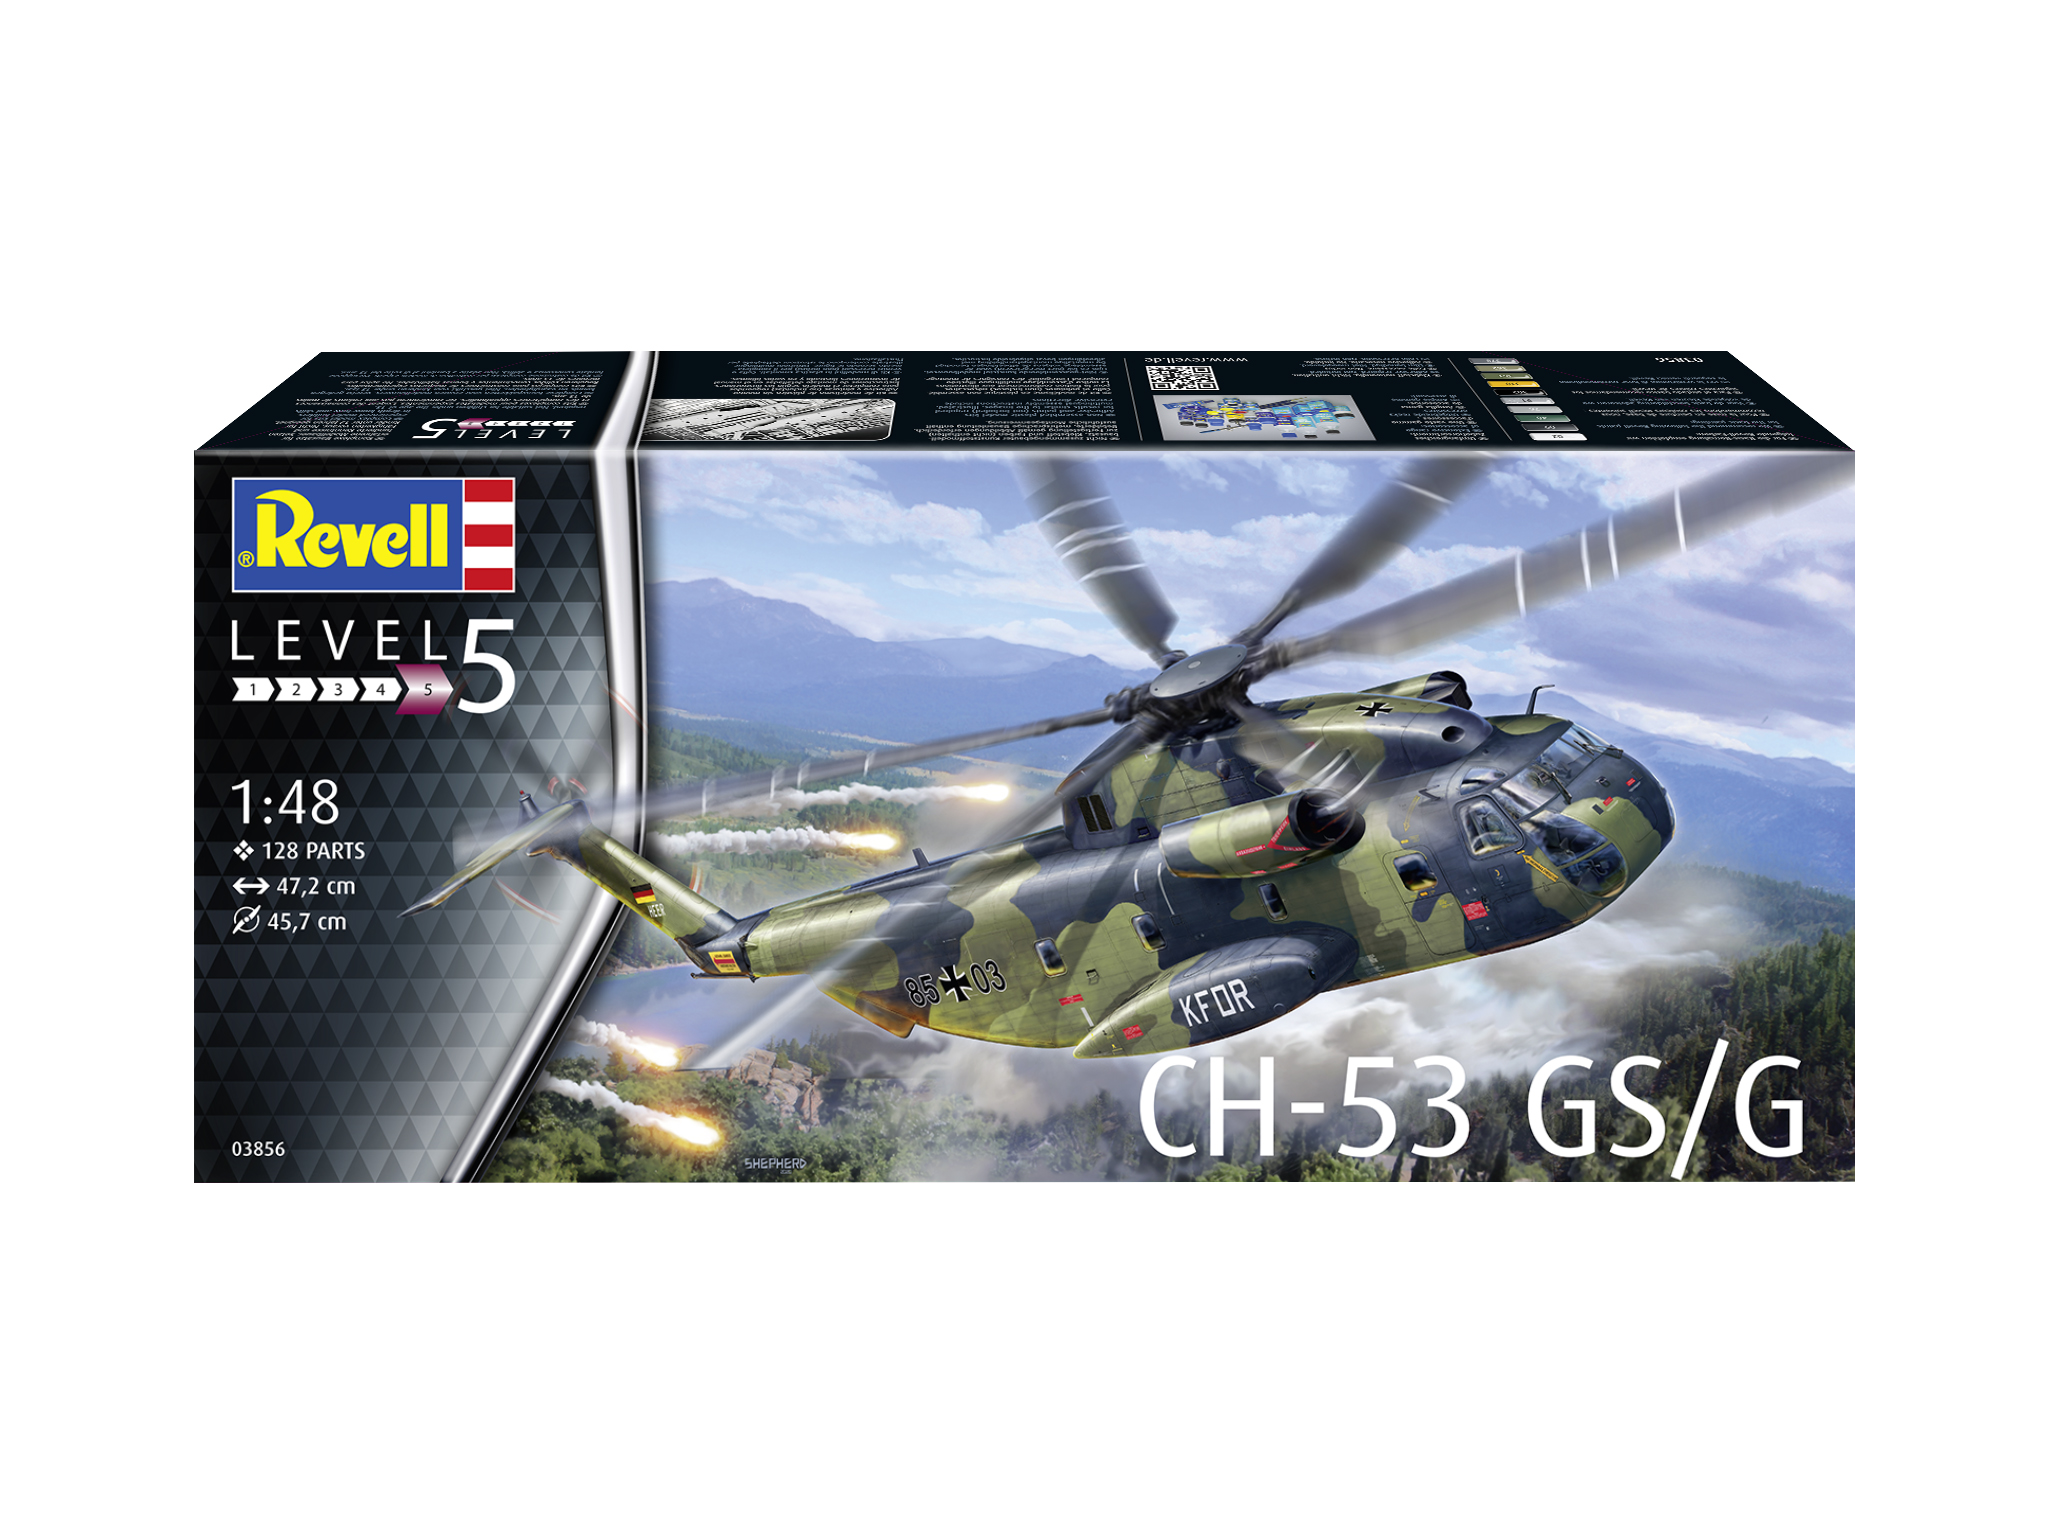 revell-03856-1-Sikorsky-CH-53-GS-G-Bundeswehr-Transporthubschrauber-heavy-lift-best-helicopter